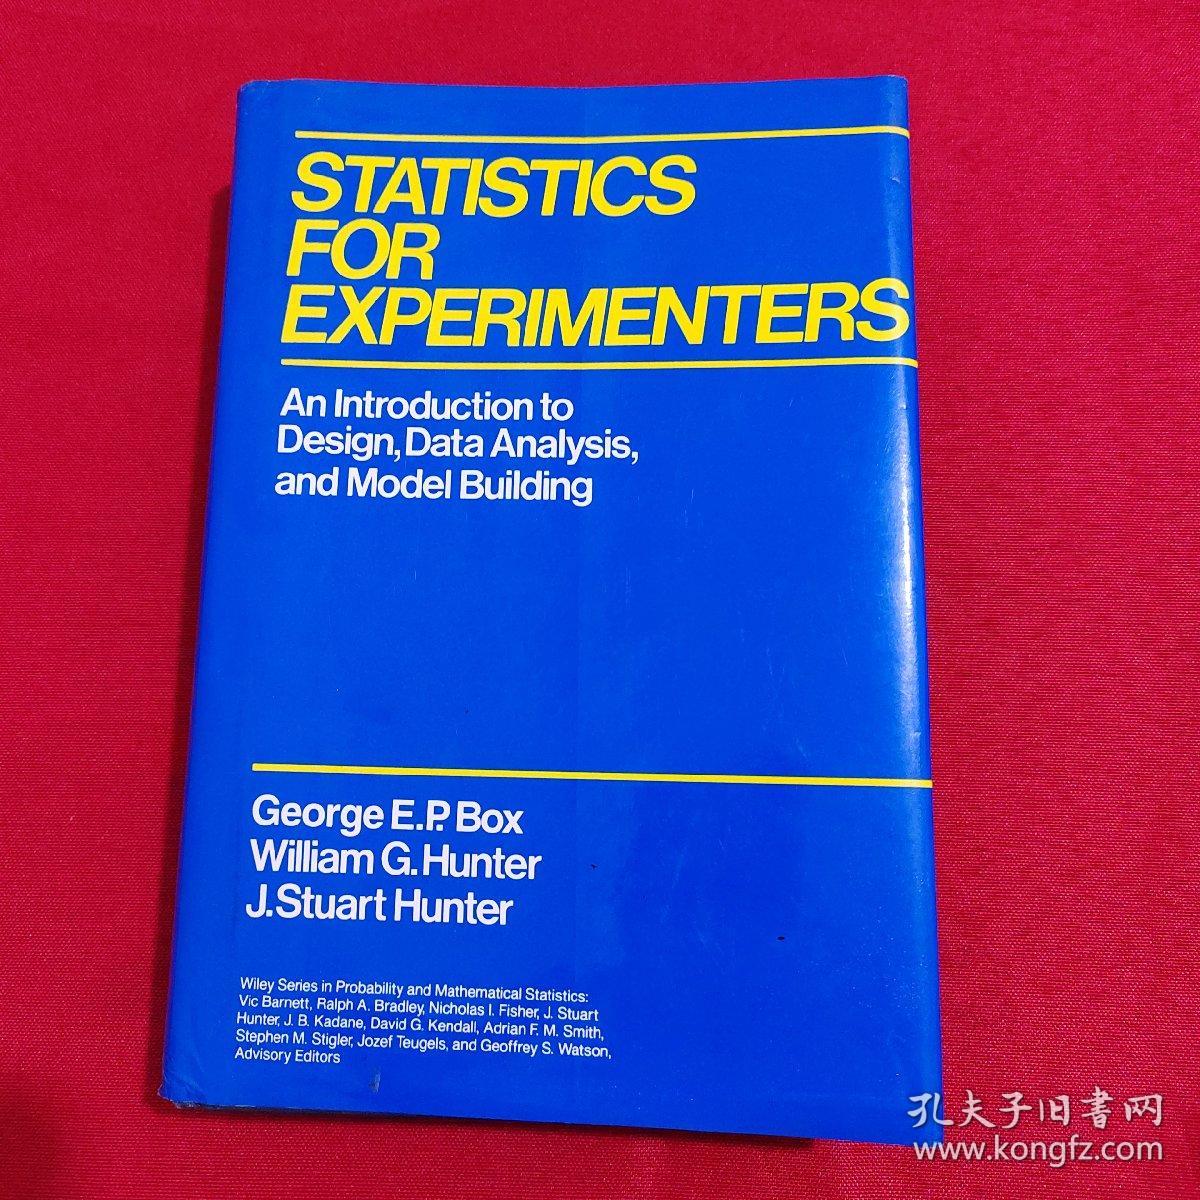 STATISTICS FOR EXPERIMENTERS  An Introduction to Design, Data Analysis, and Model Building